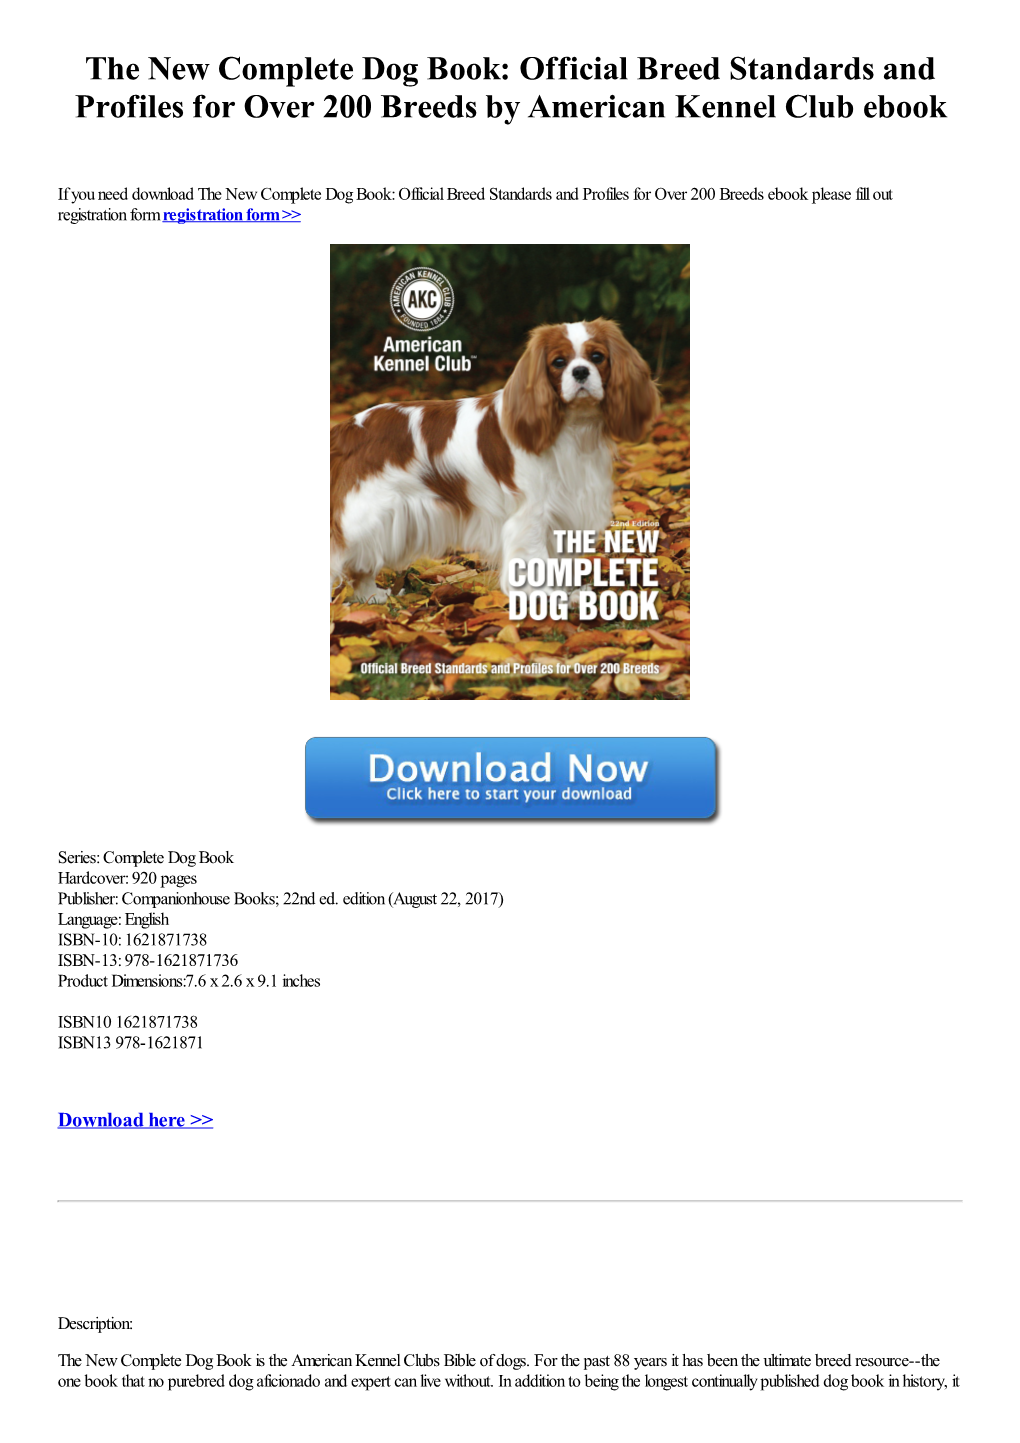 The New Complete Dog Book: Official Breed Standards and Profiles for Over 200 Breeds by American Kennel Club Ebook